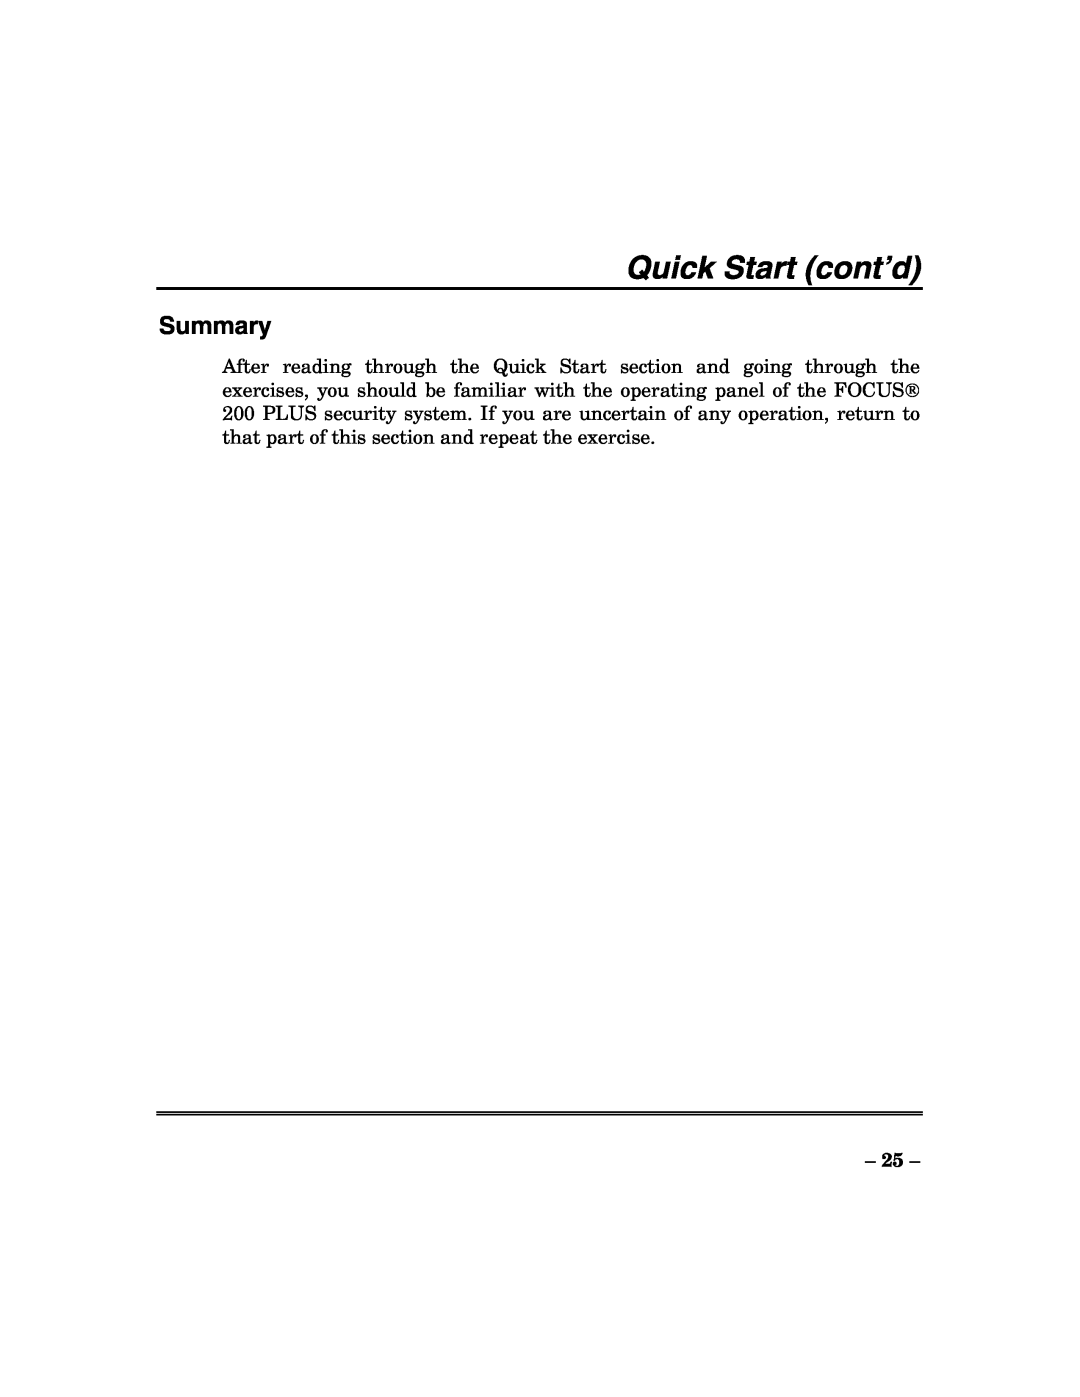 ADT Security Services 200 Plus manual Quick Start cont’d, Summary 